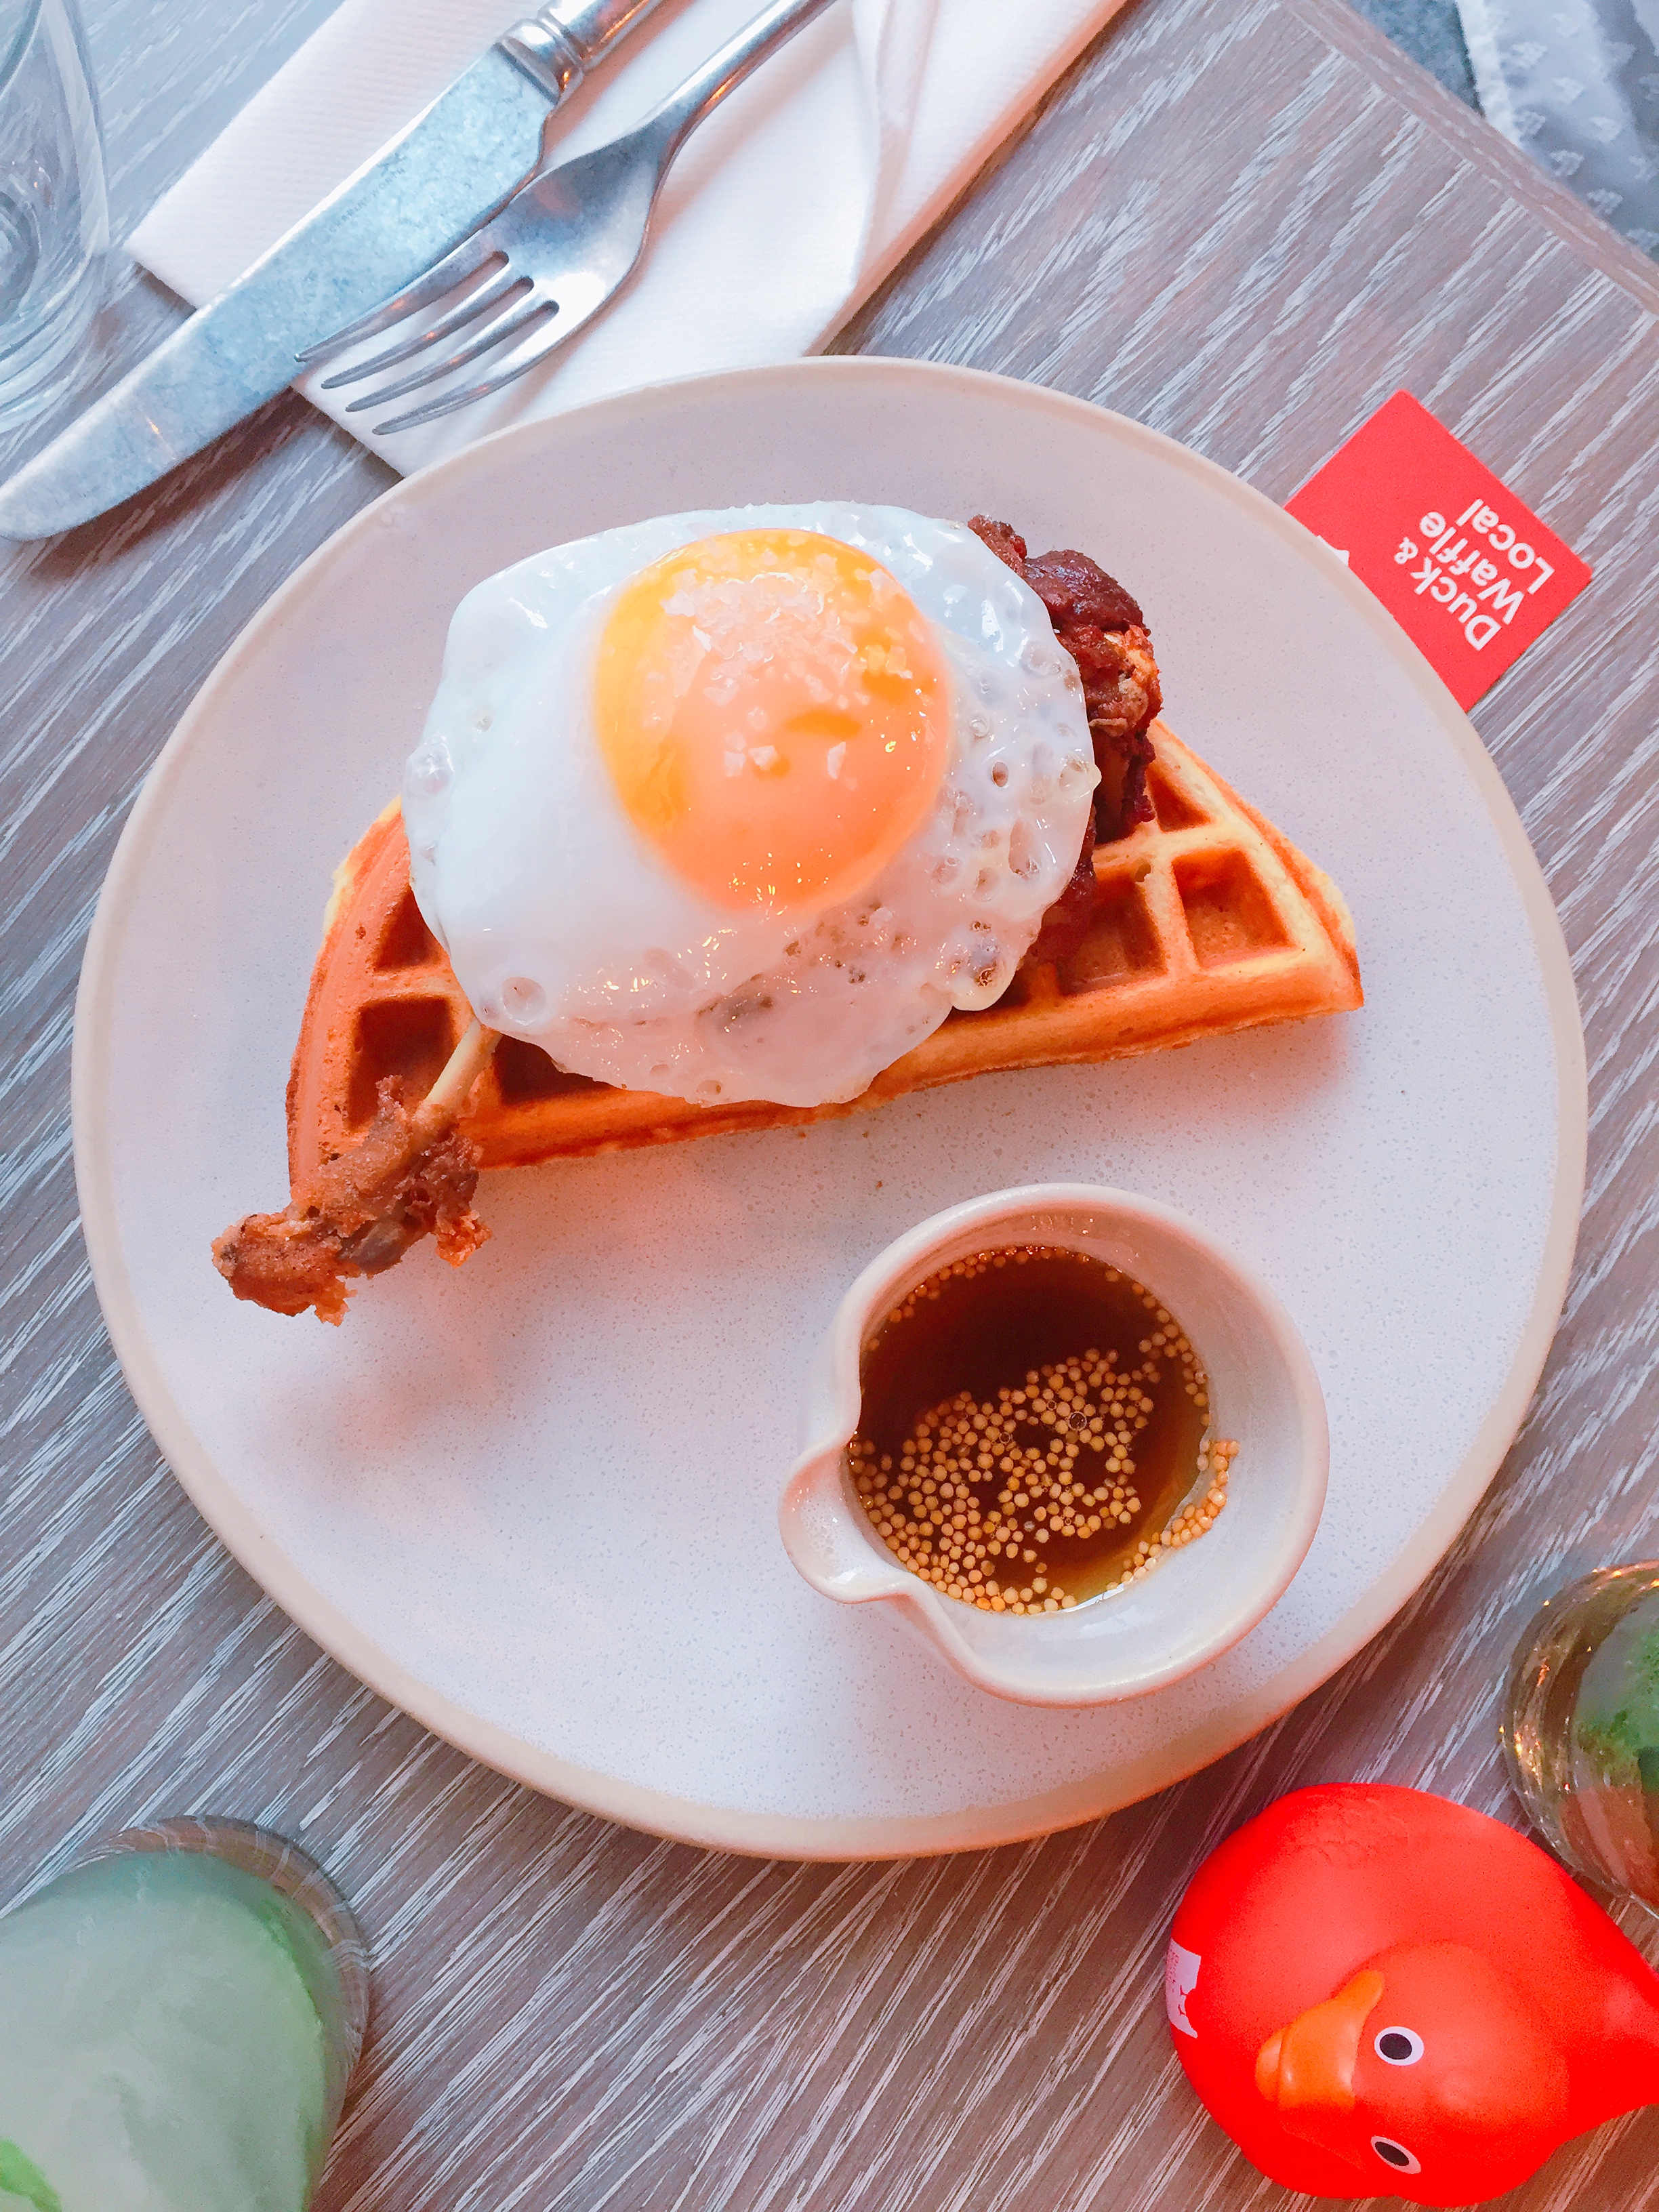 Duck and waffle local review 